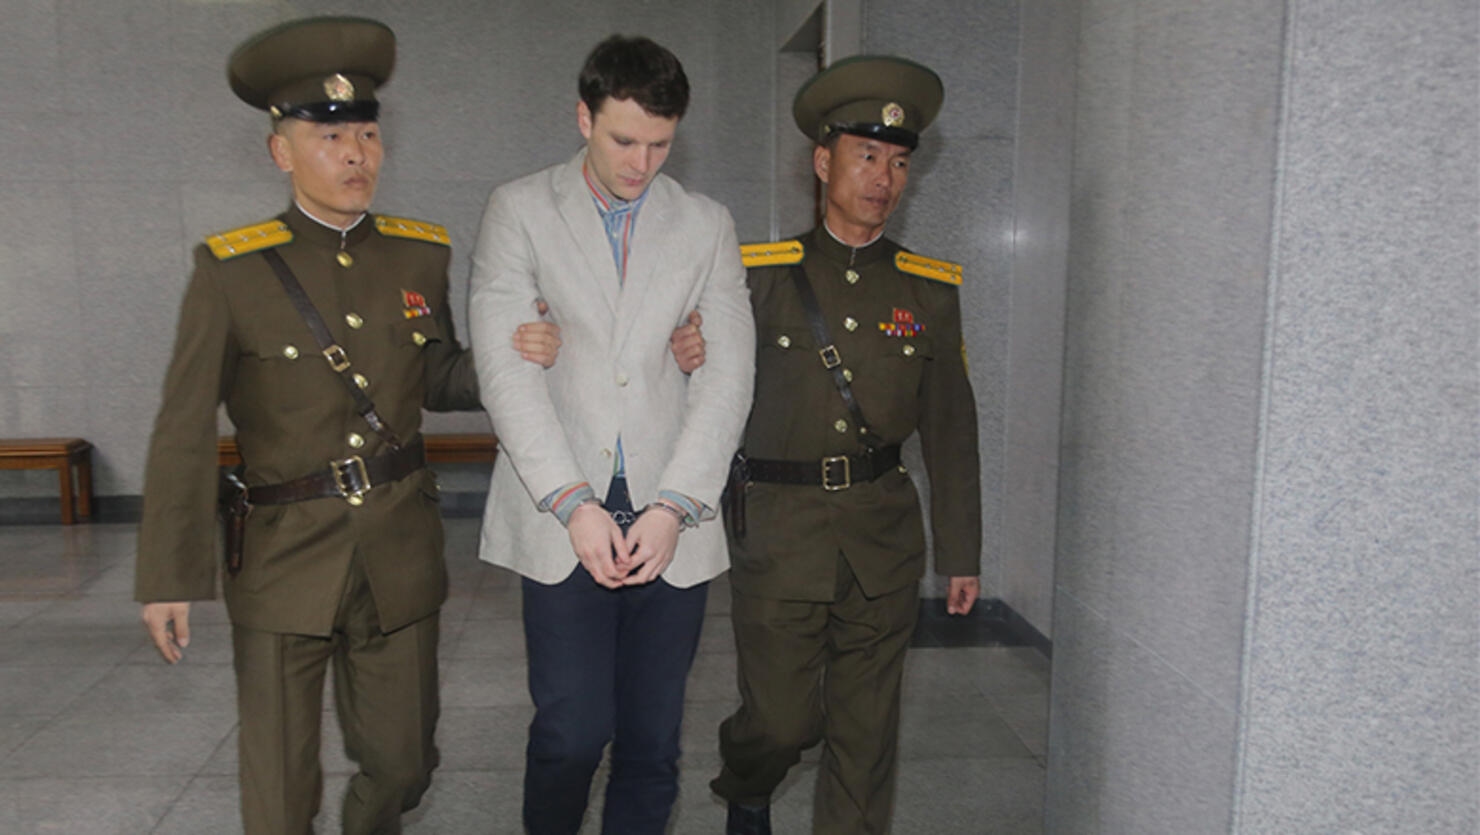 American student Otto Frederick Warmbier, center, arrives at a court for his trial in Pyongyang, capital of the Democratic People's Republic of Korea